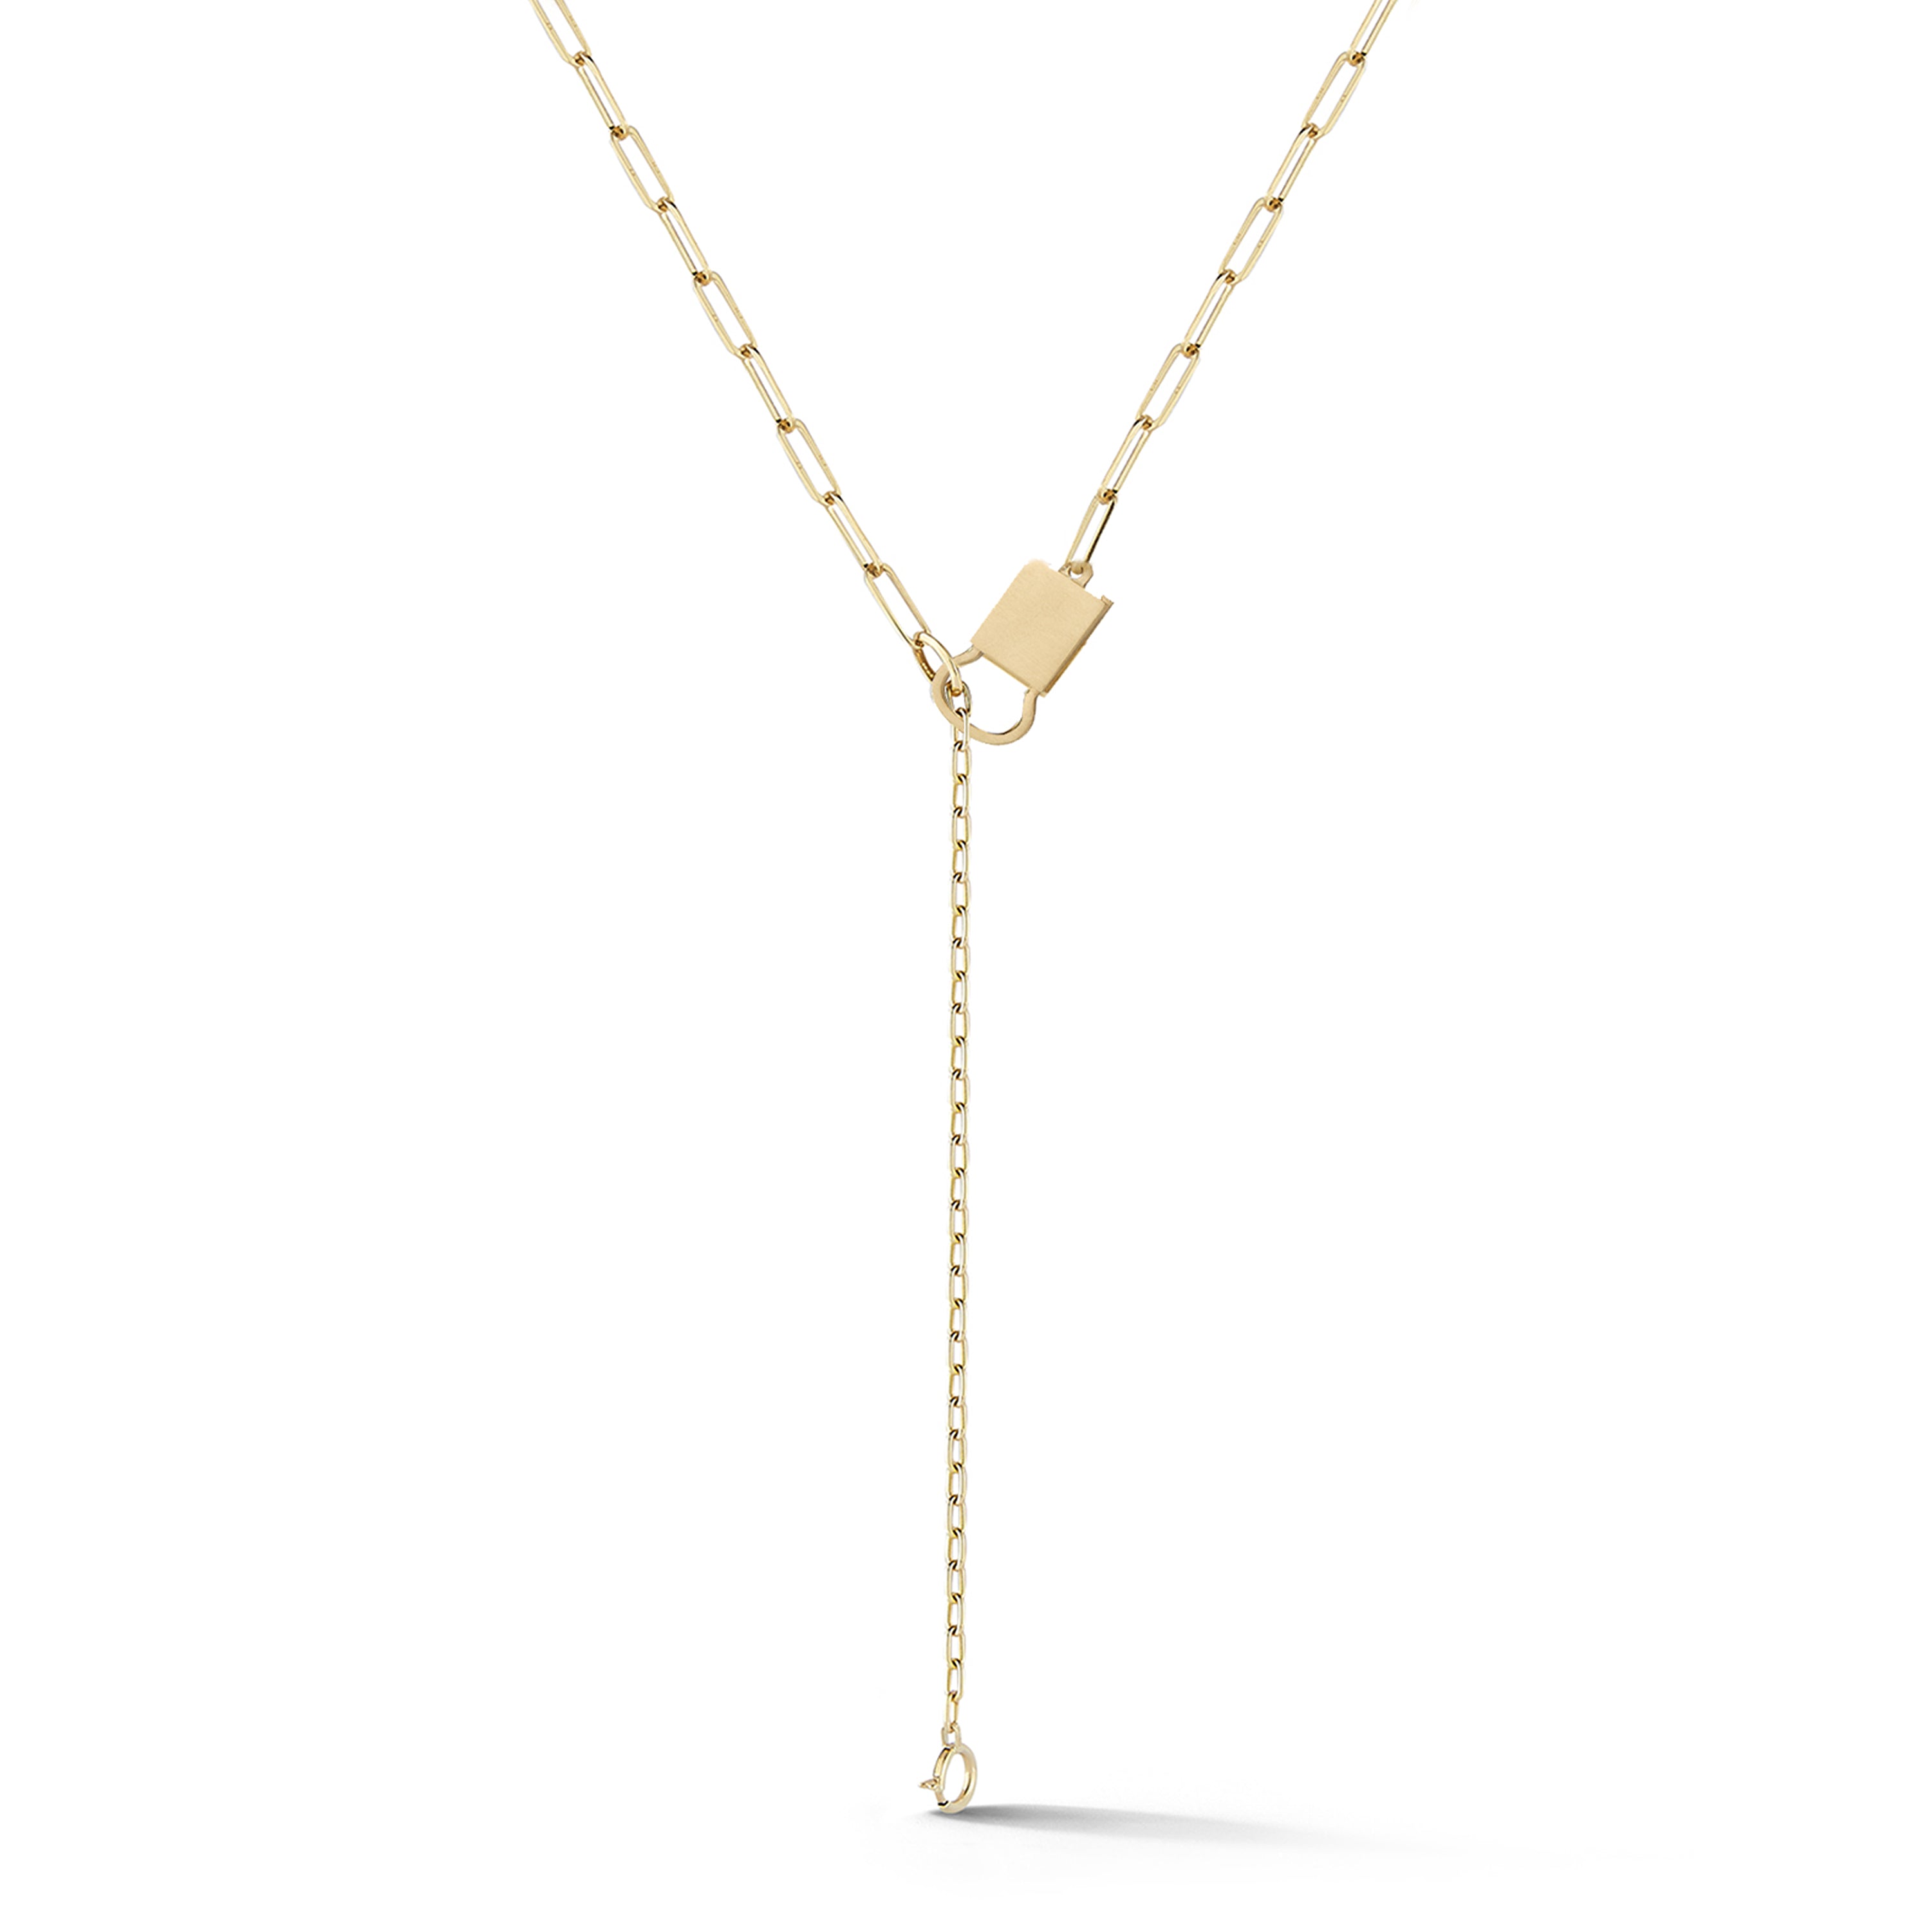 Betty Long Necklace in 18K Yellow Gold